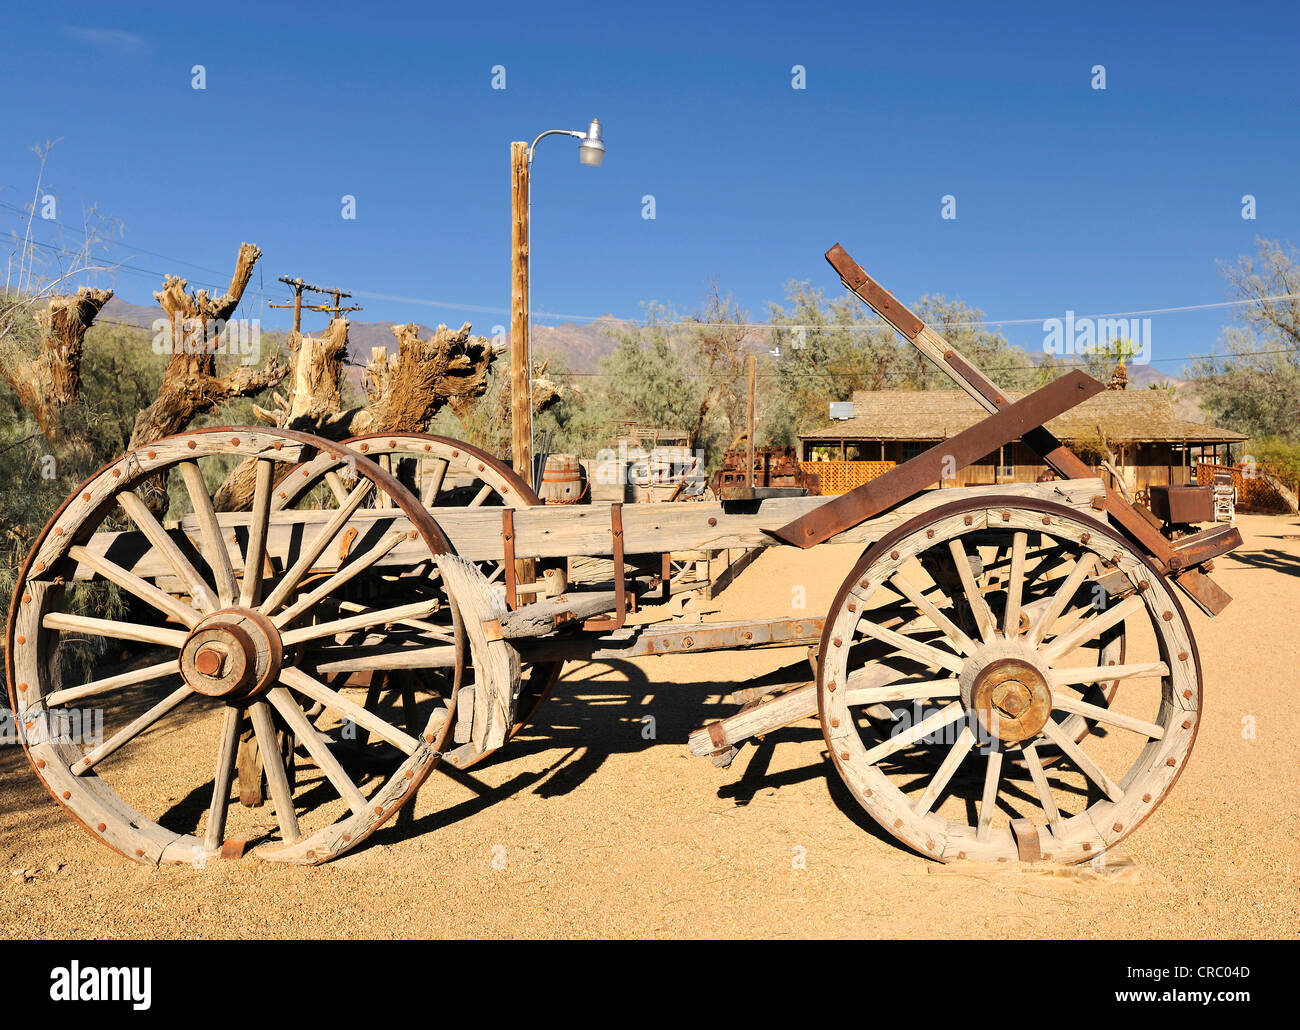 Running gear, chassis of a water tanker, historical Twenty Mule Team for the transport of borax, Borax Museum Stock Photo